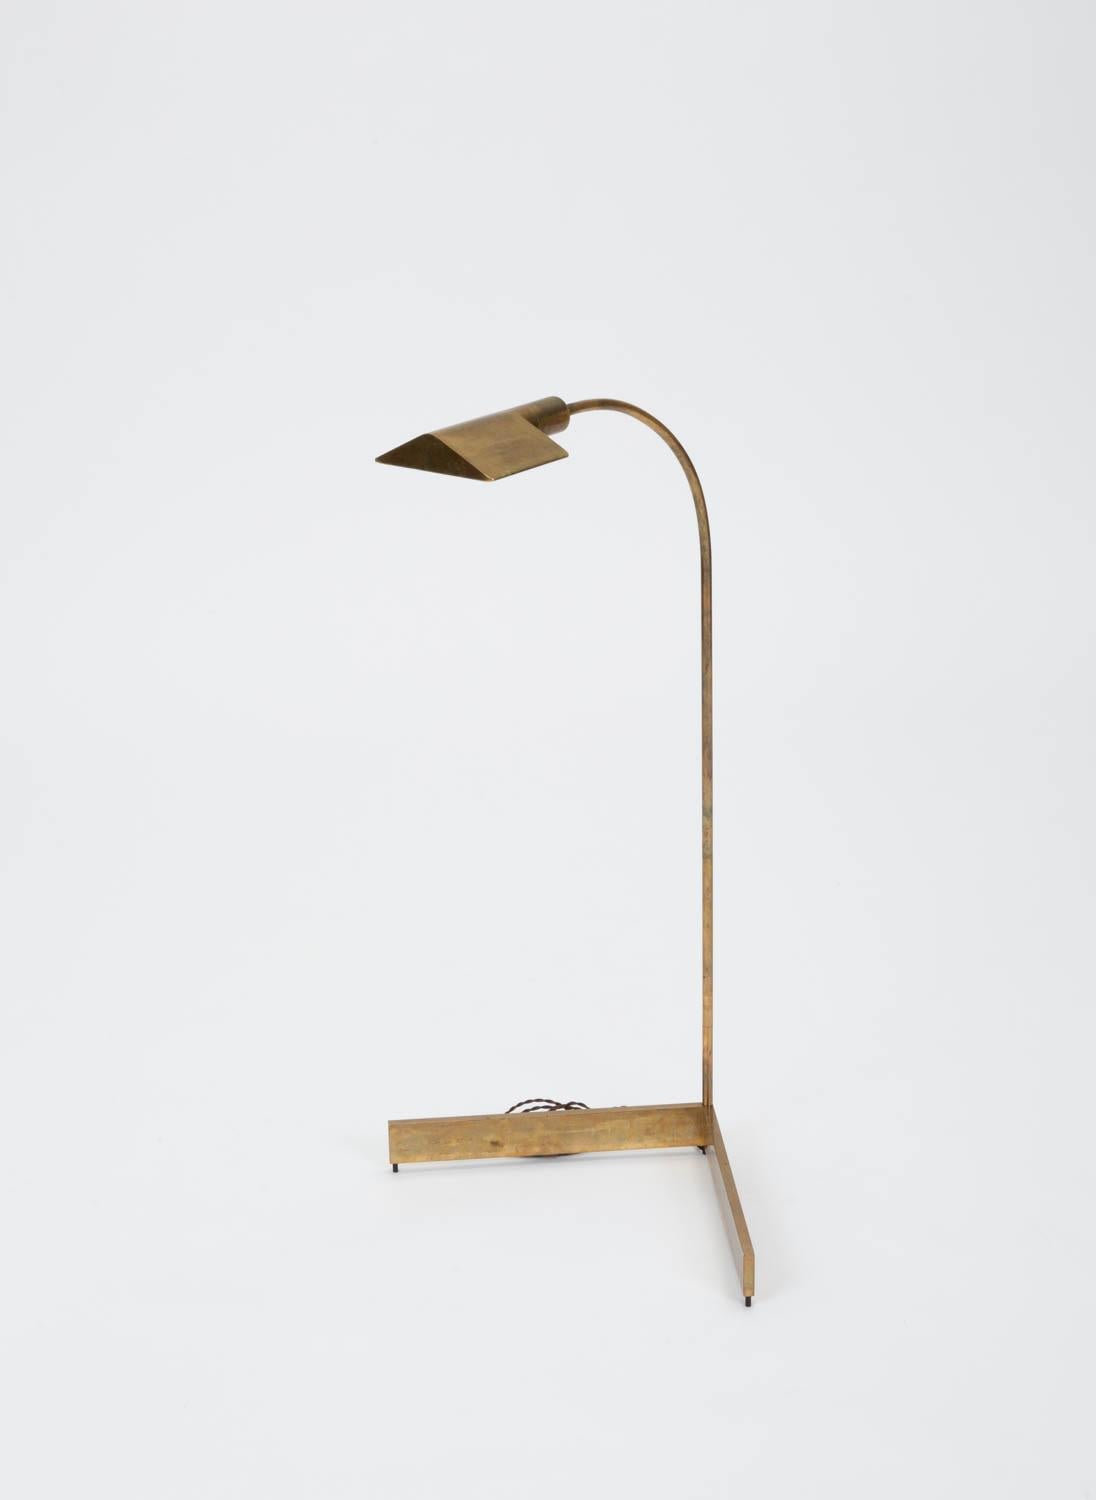 Designed in the 1970s, the brass floor lamps by Cedric Hartman are an enduring design Classic. The modernist floor lamp features a triangular brass shade attached to a curved stem that offers focused task lighting. The arched brass pole terminates